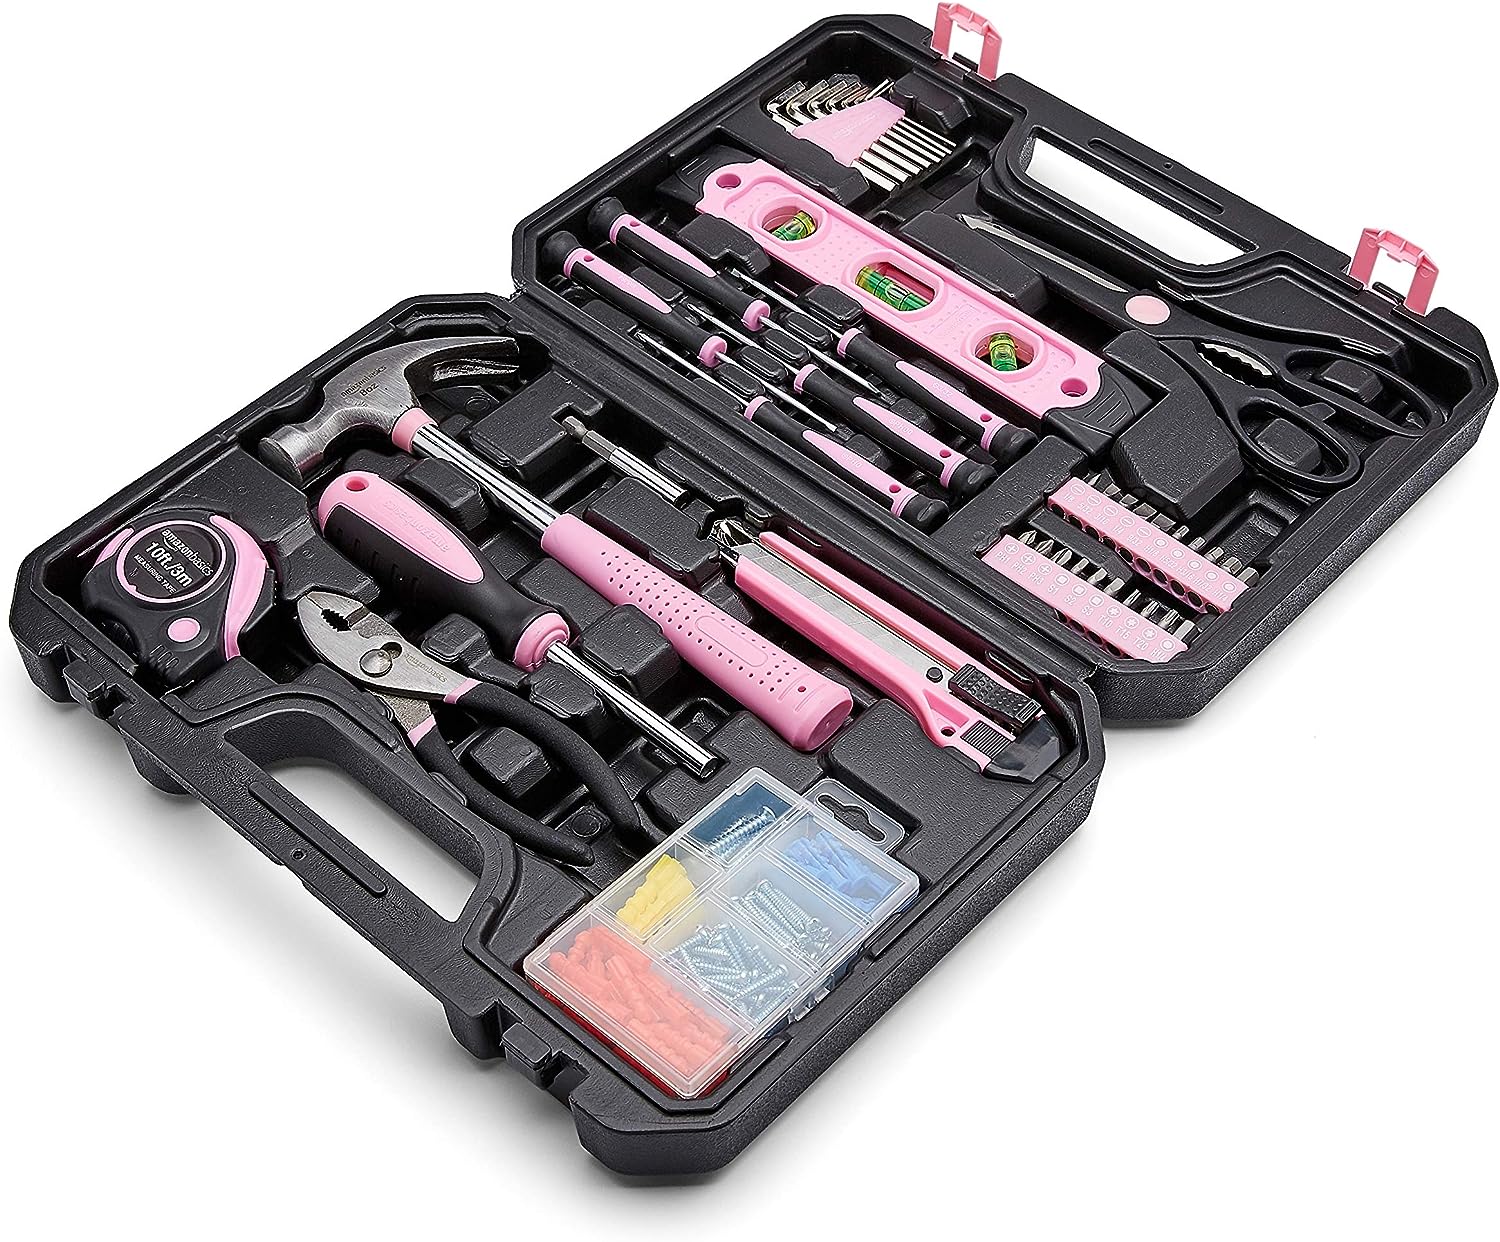 efficere's 40-piece all purpose household pink tool kit best christmas gifts for a lady who is newly married